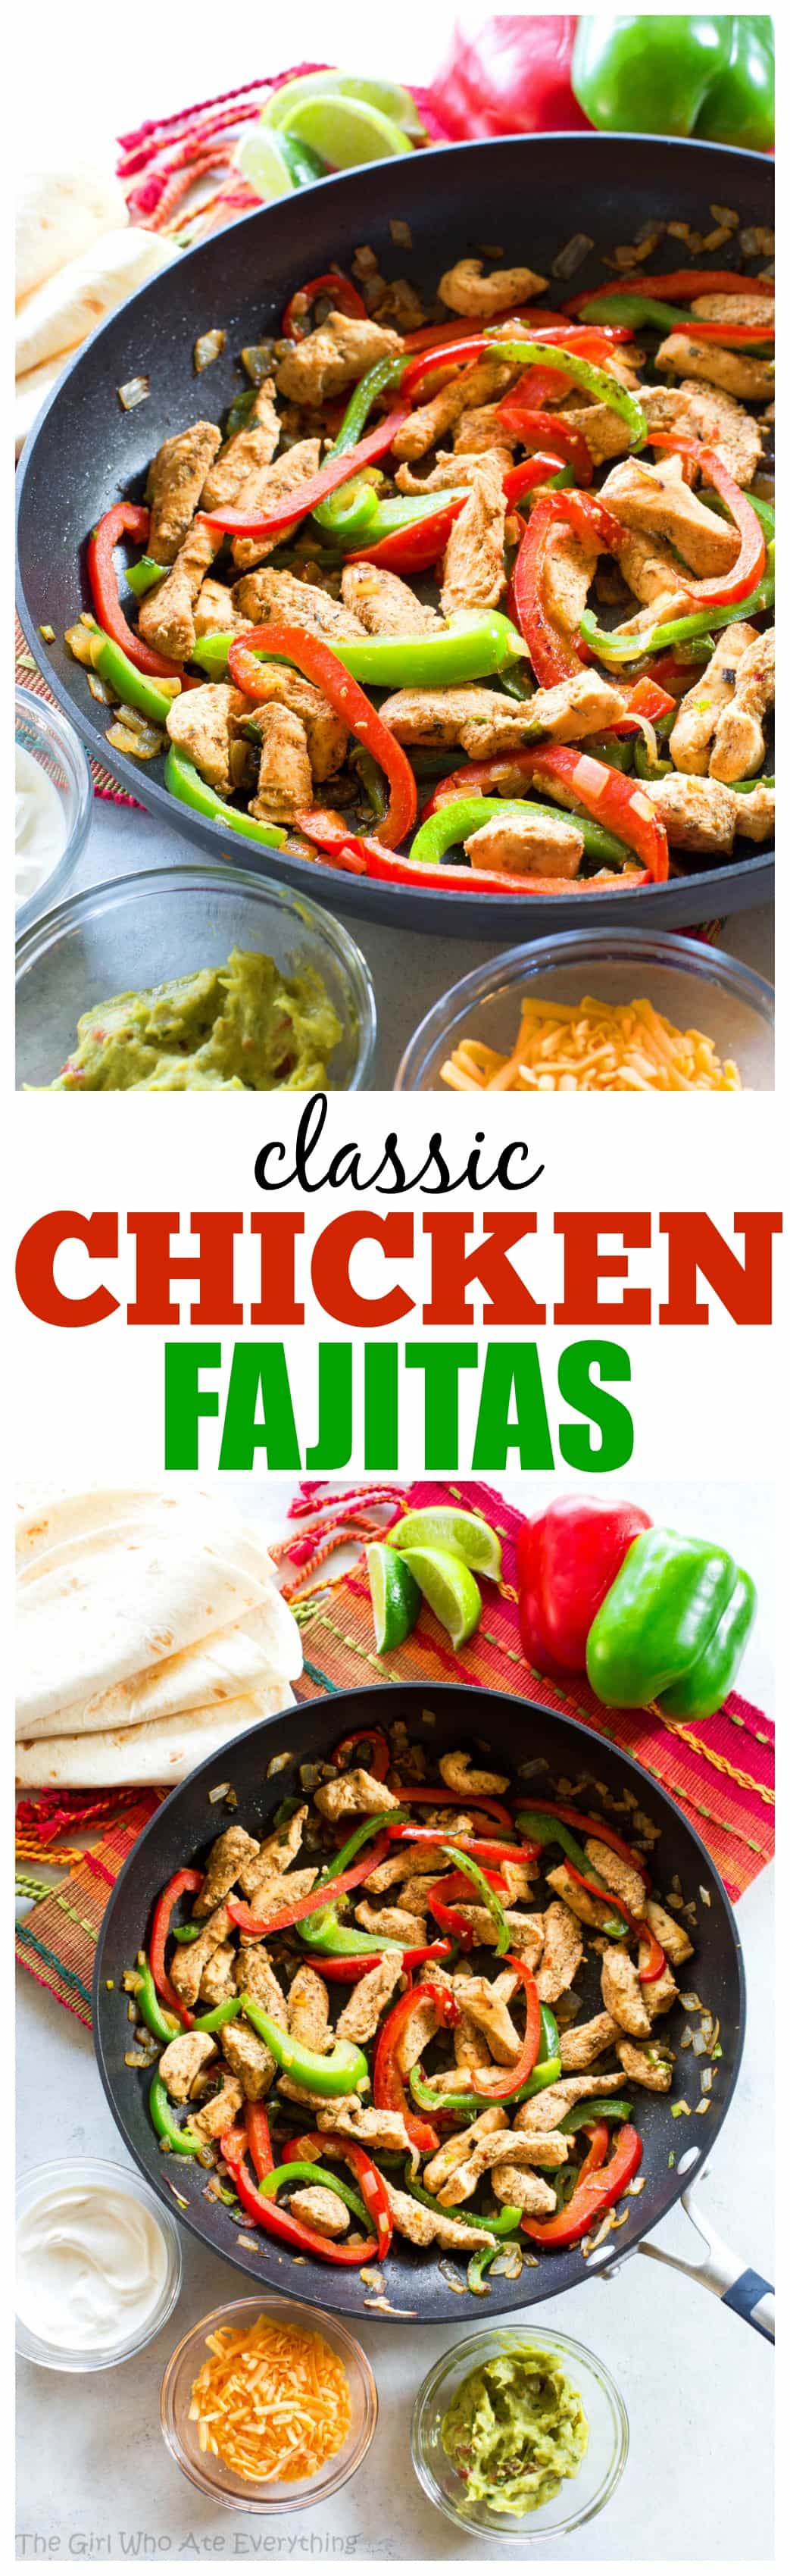 Classic Chicken Fajitas - full of flavor, easy, and just what you want when you're craving fajitas. #easy #chicken #fajitas #mexican #dinner #easy #recipe